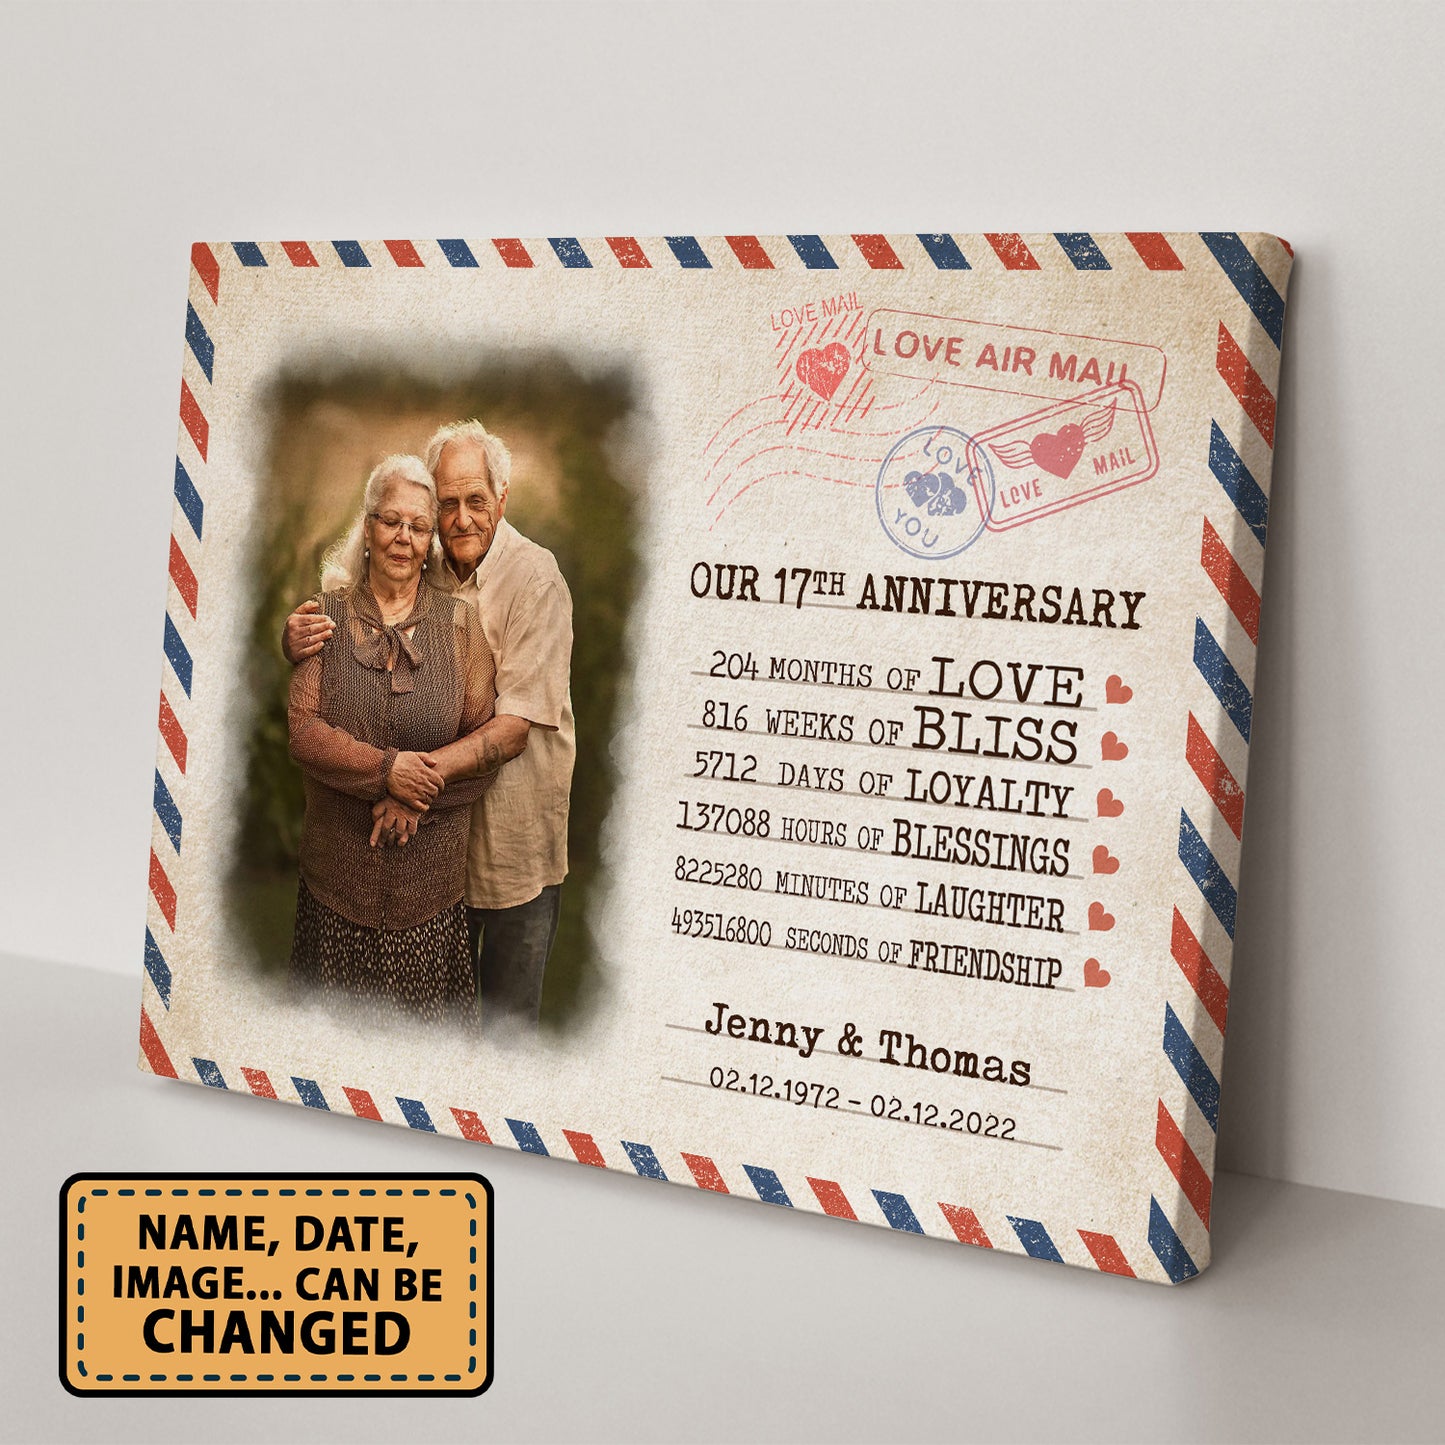 Our 17th Anniversary Letter Valentine Gift Personalized Canvas